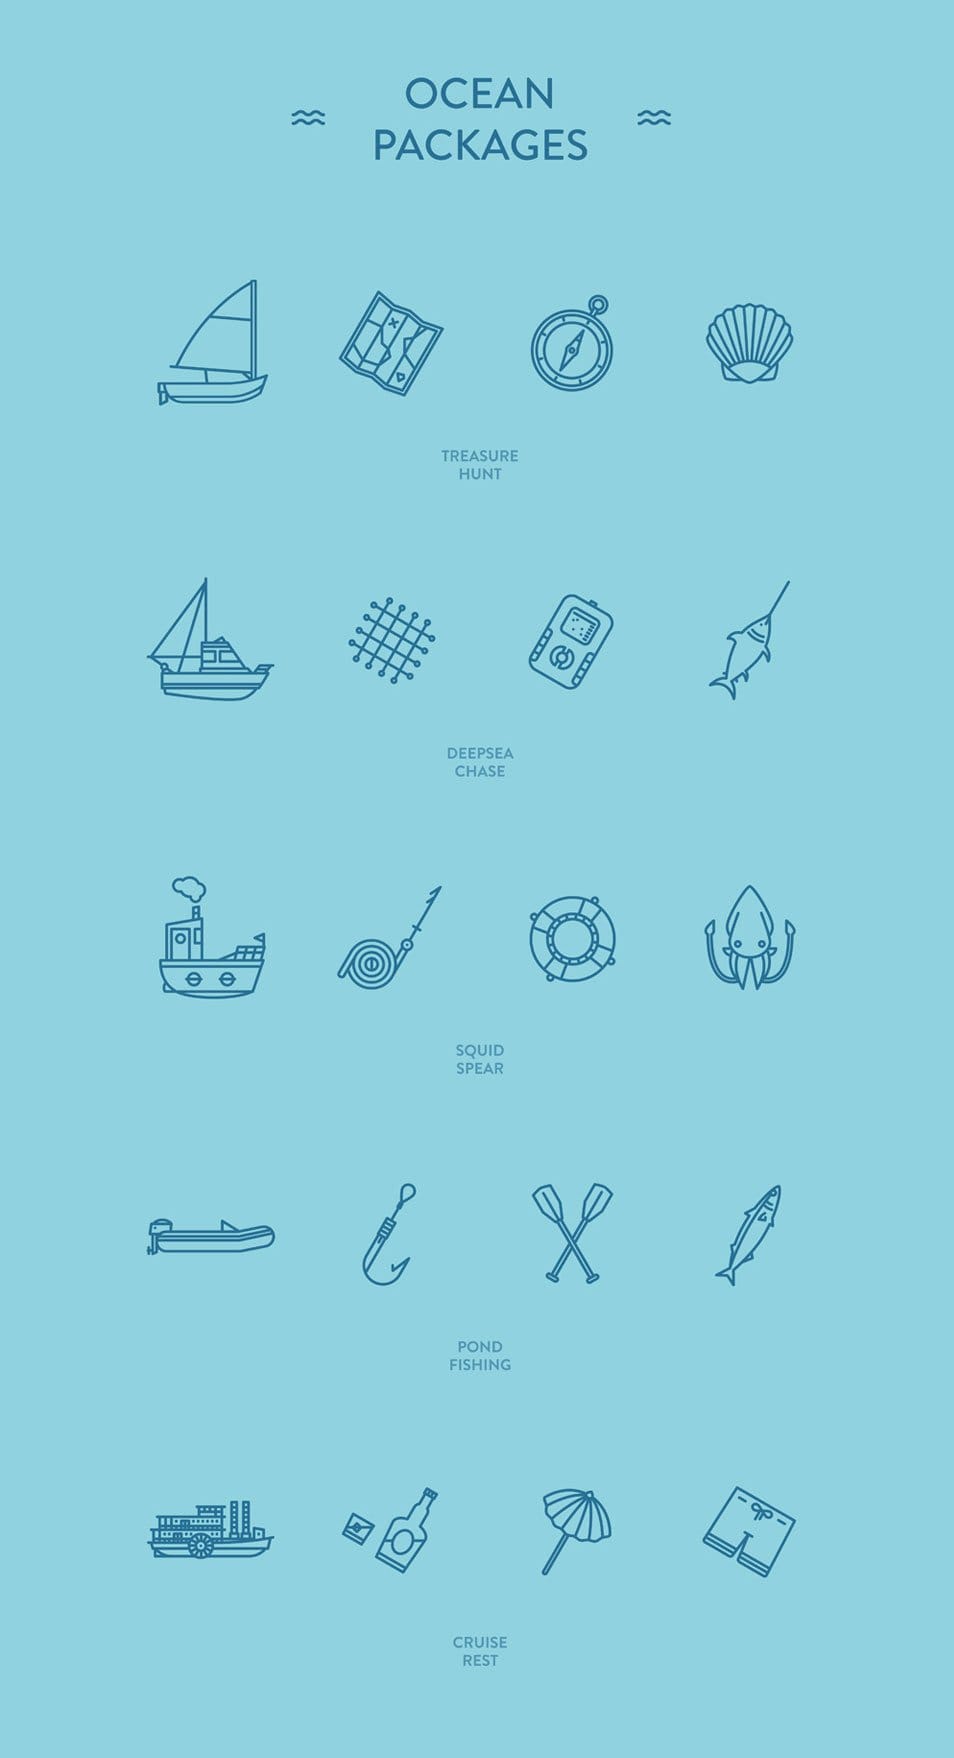 Ocean Packages - Free icon sets